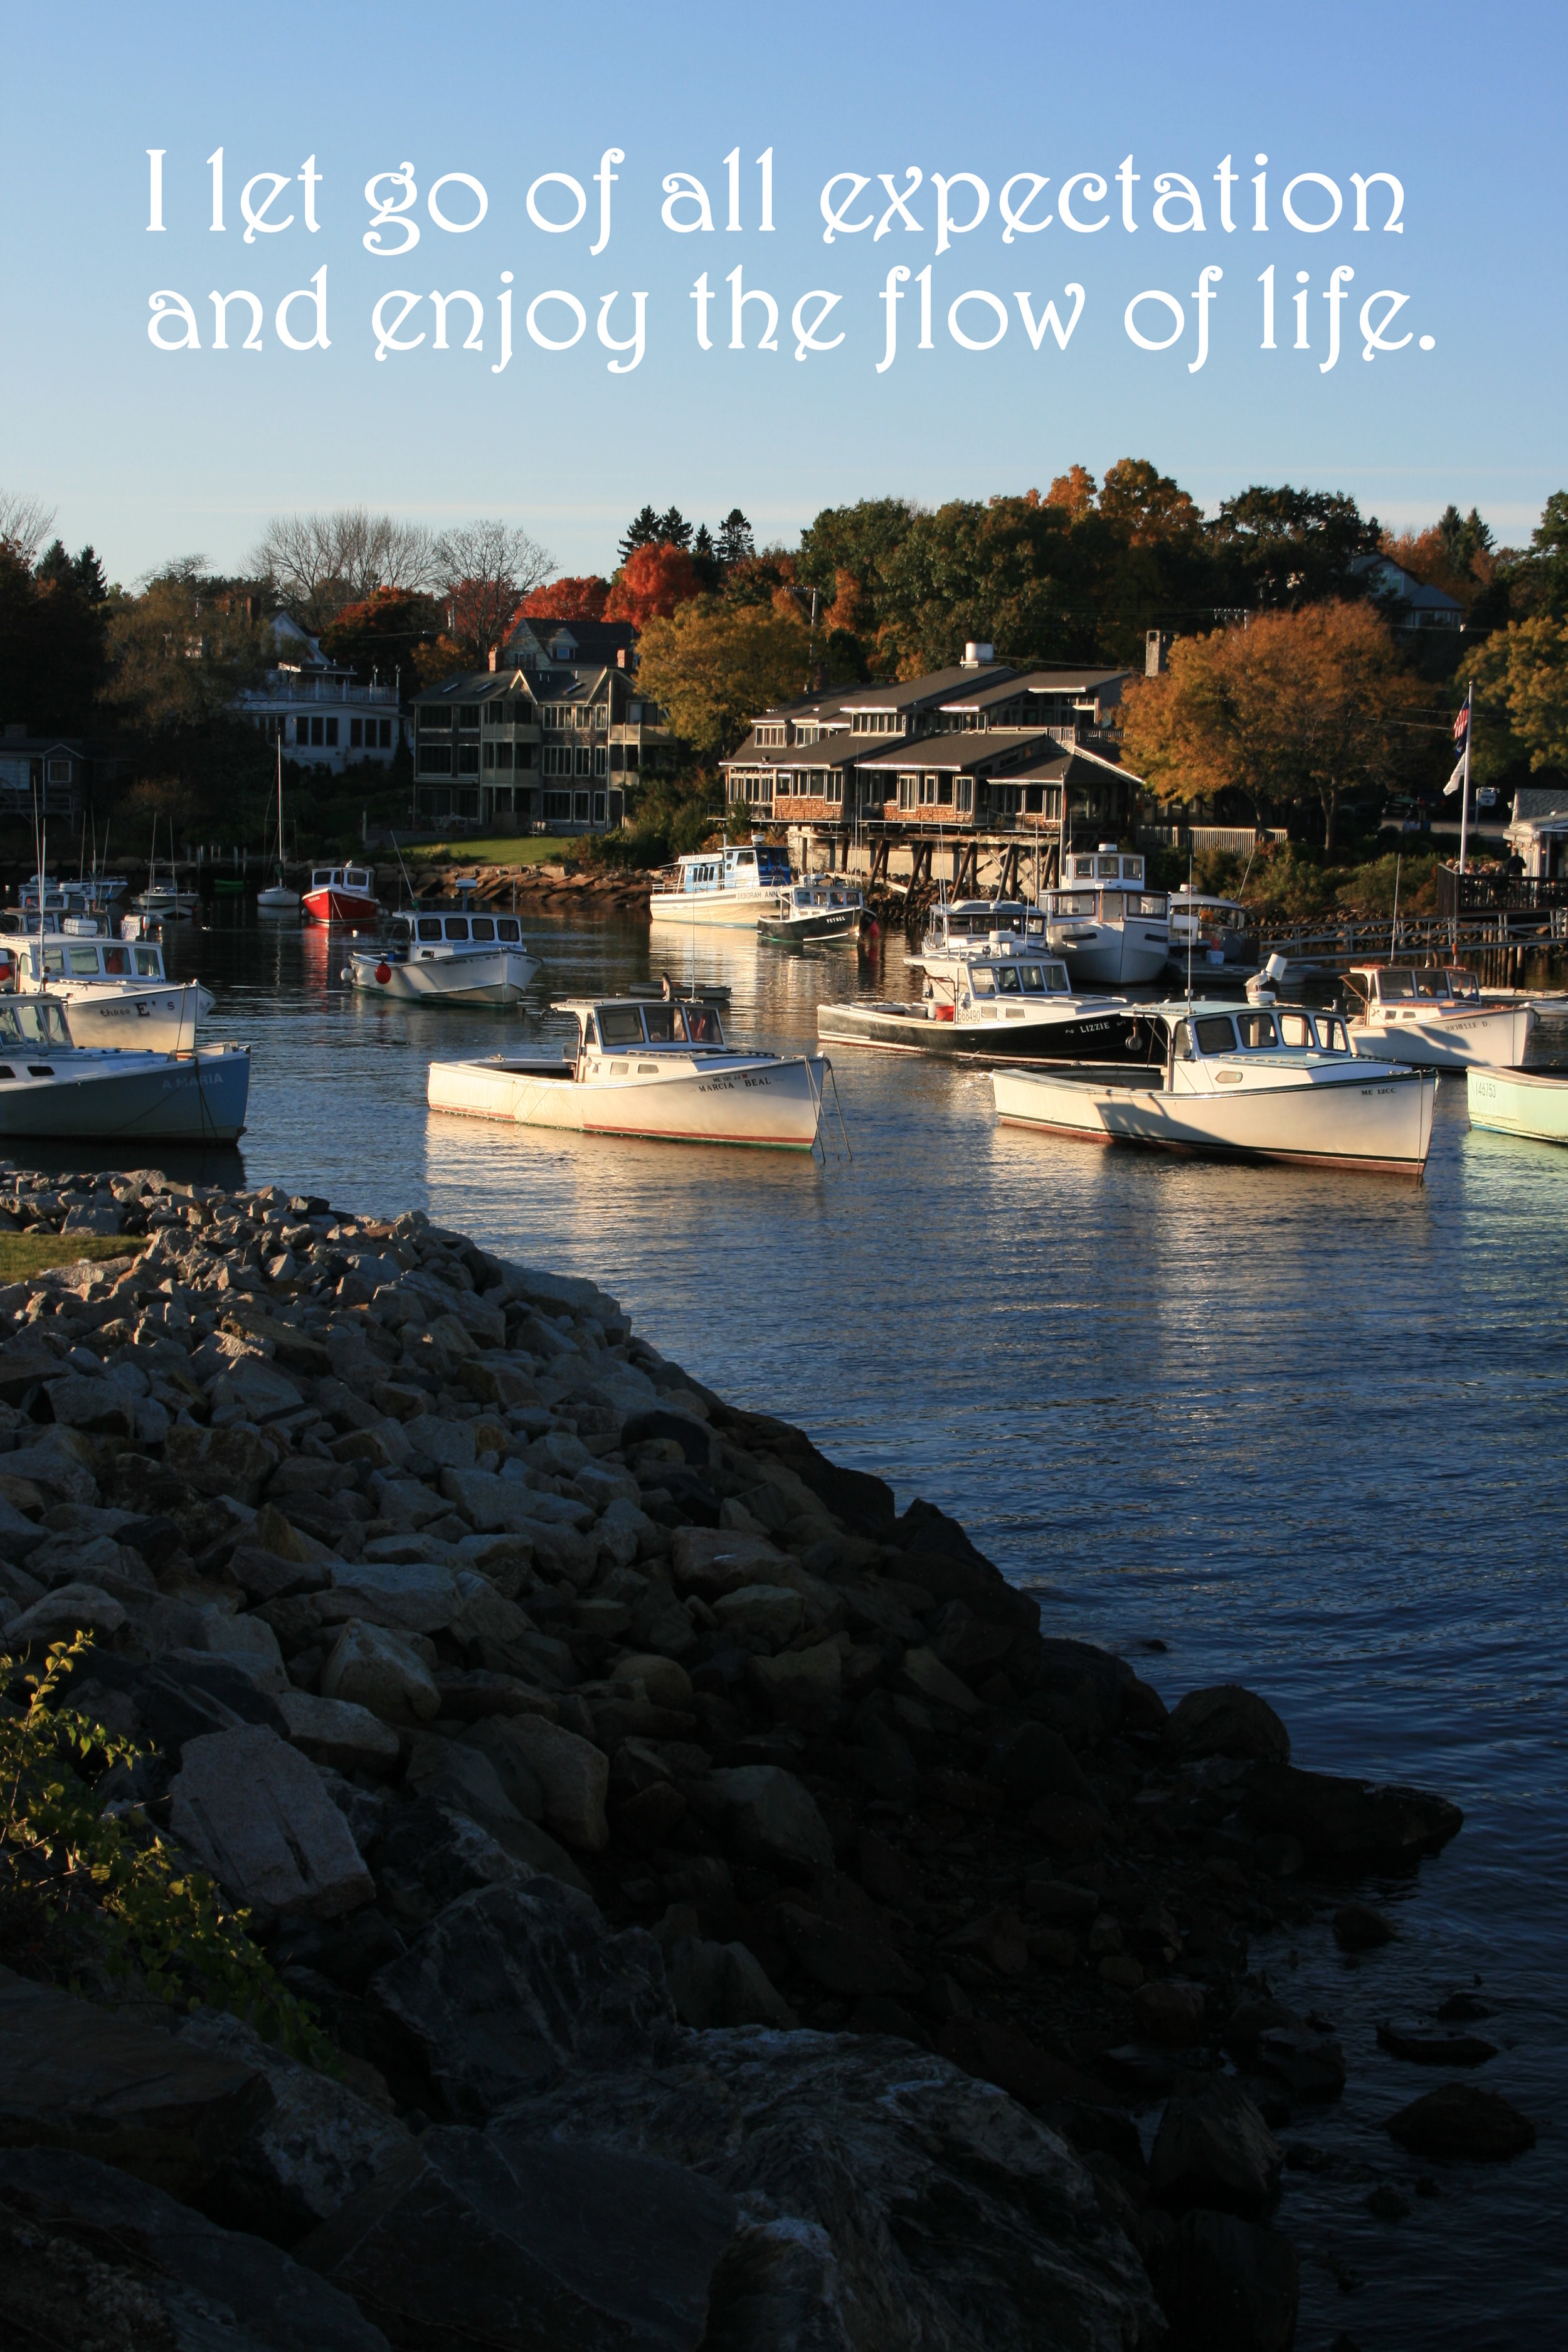 Perkins Cove Boats and Rocks_let go of expectation.jpg